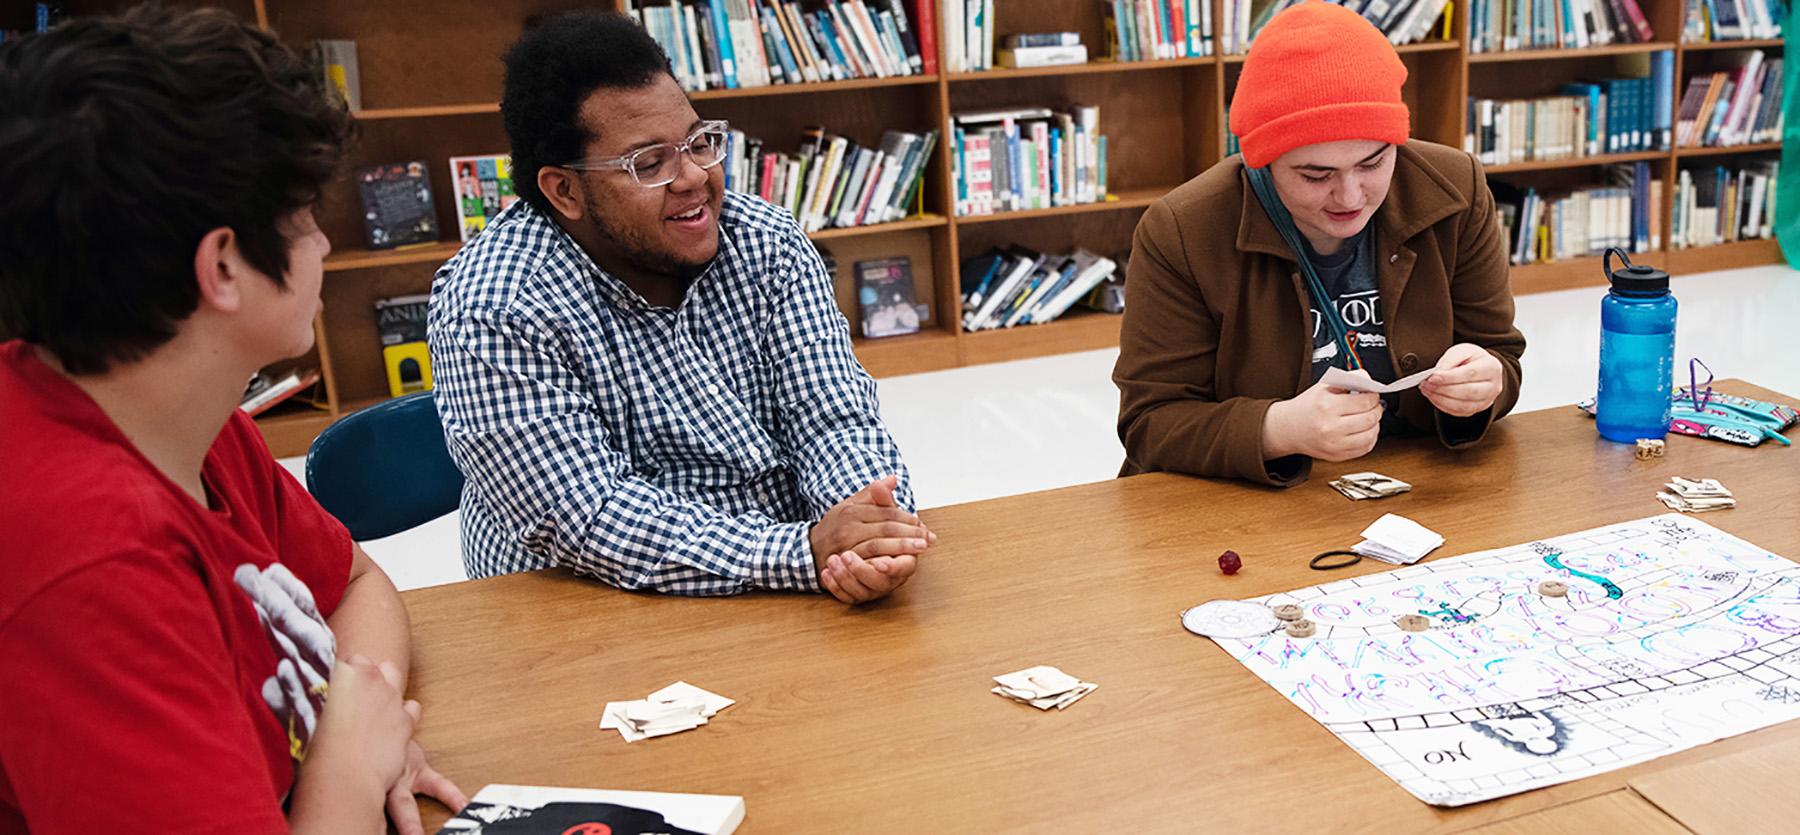 Students play a board game together